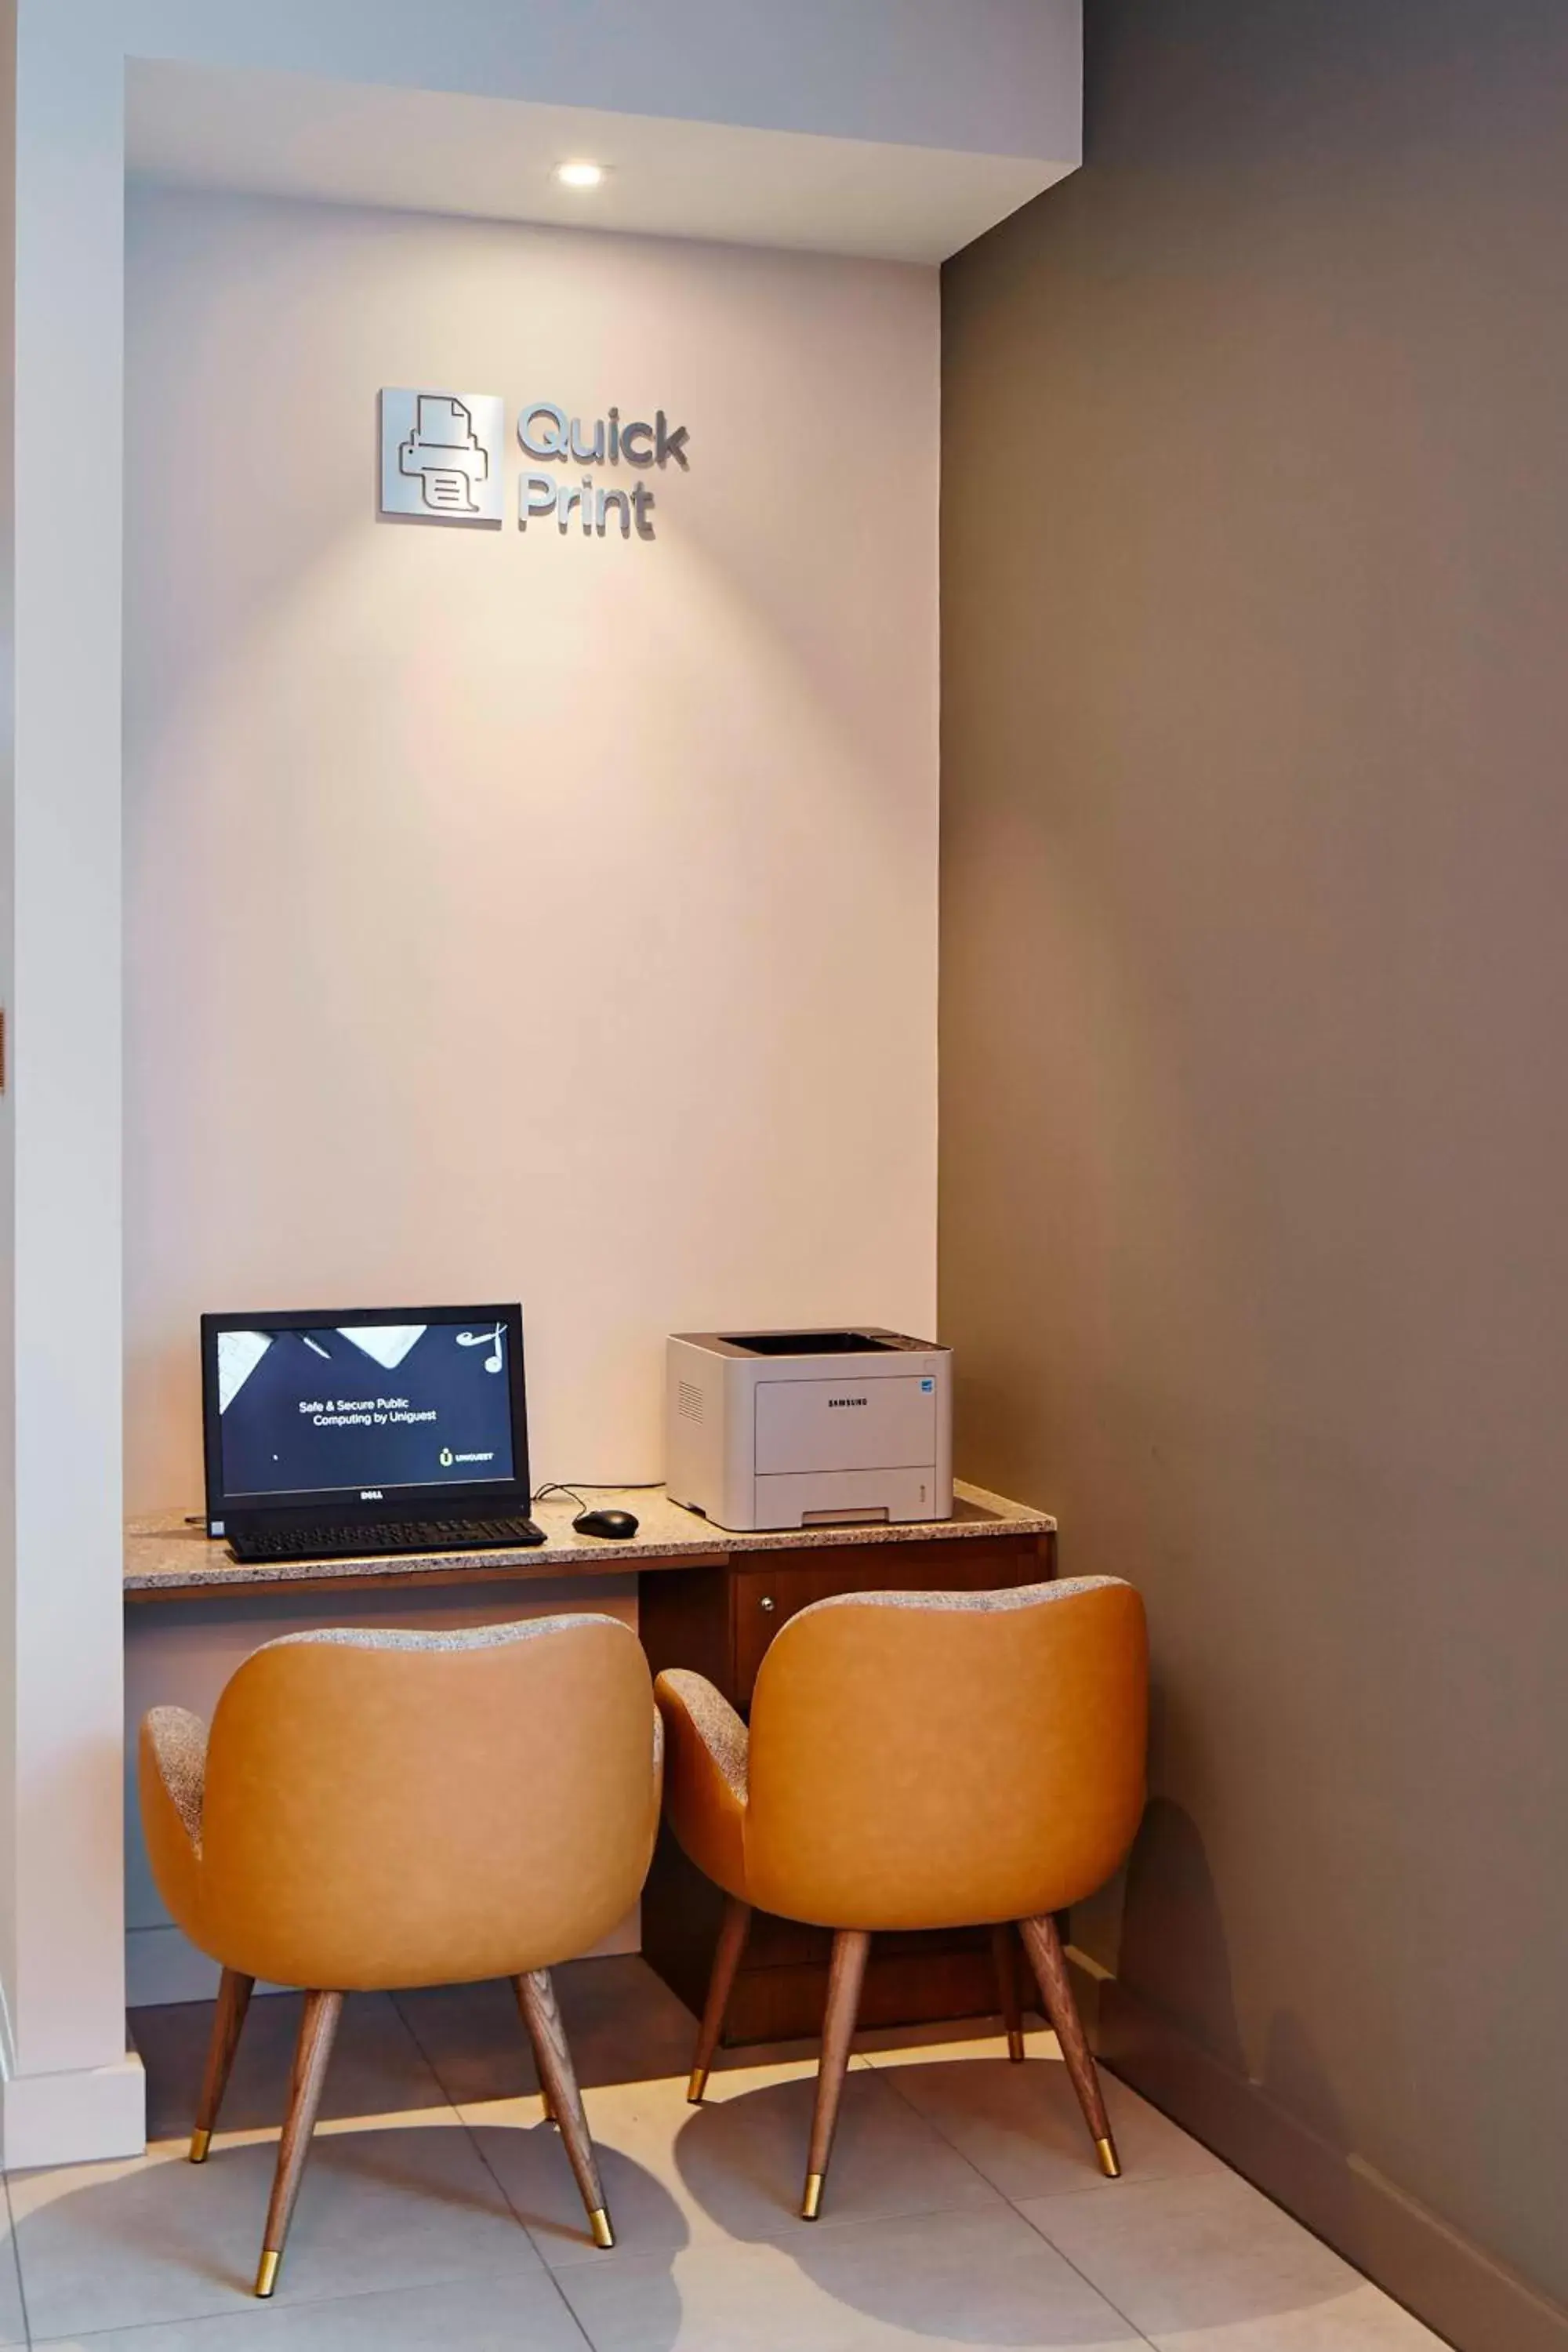 Business facilities in Courtyard by Marriott Oxford South